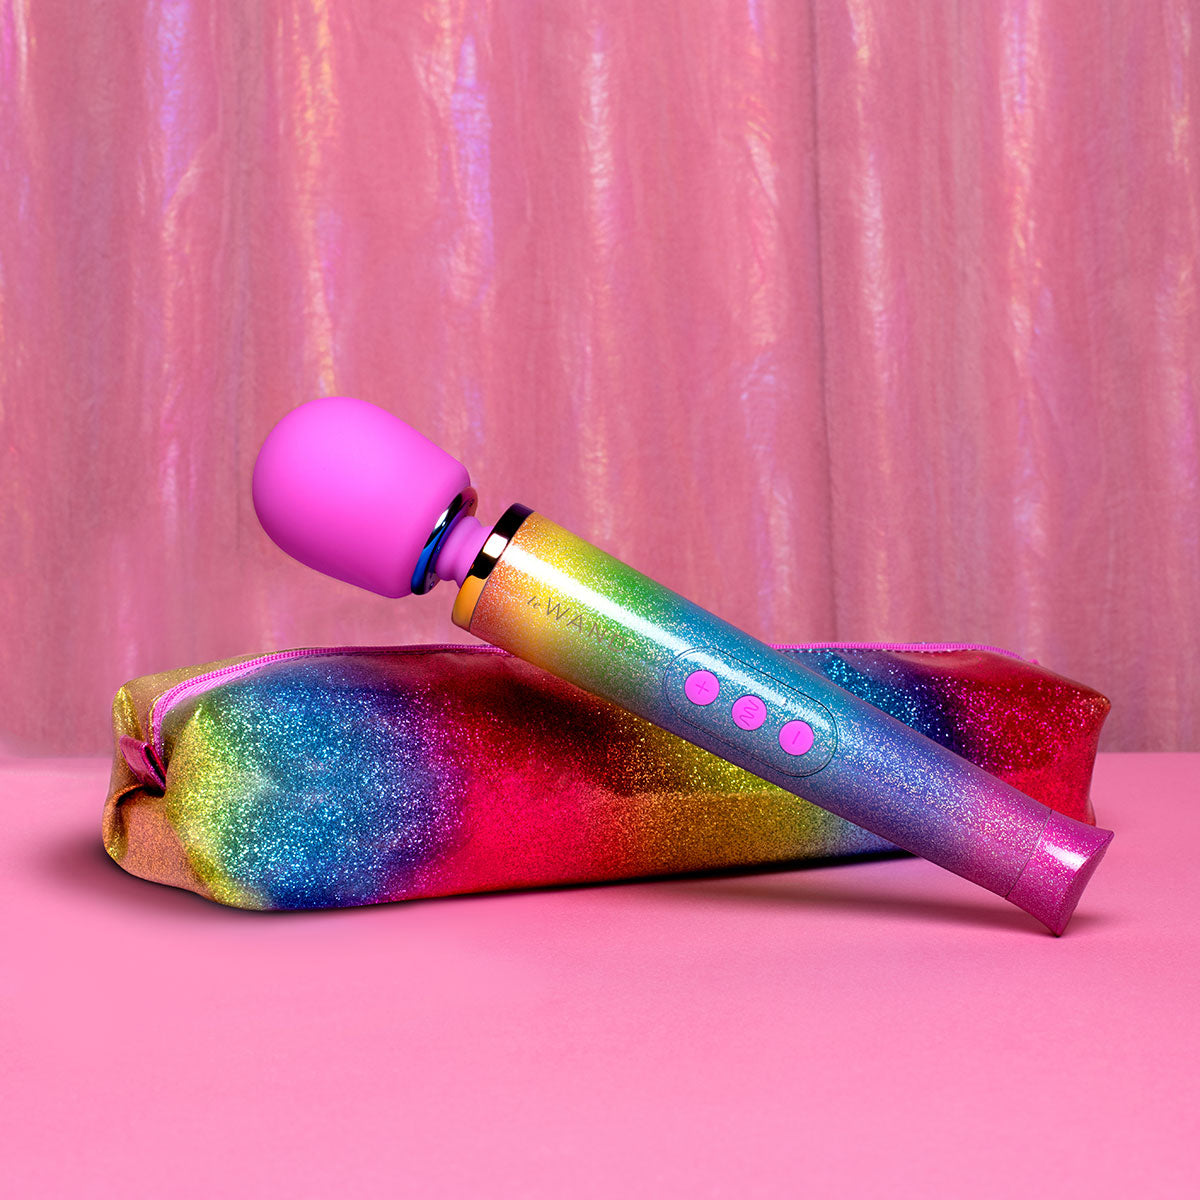 Le Wand Petite Massager - Rainbow Ombre